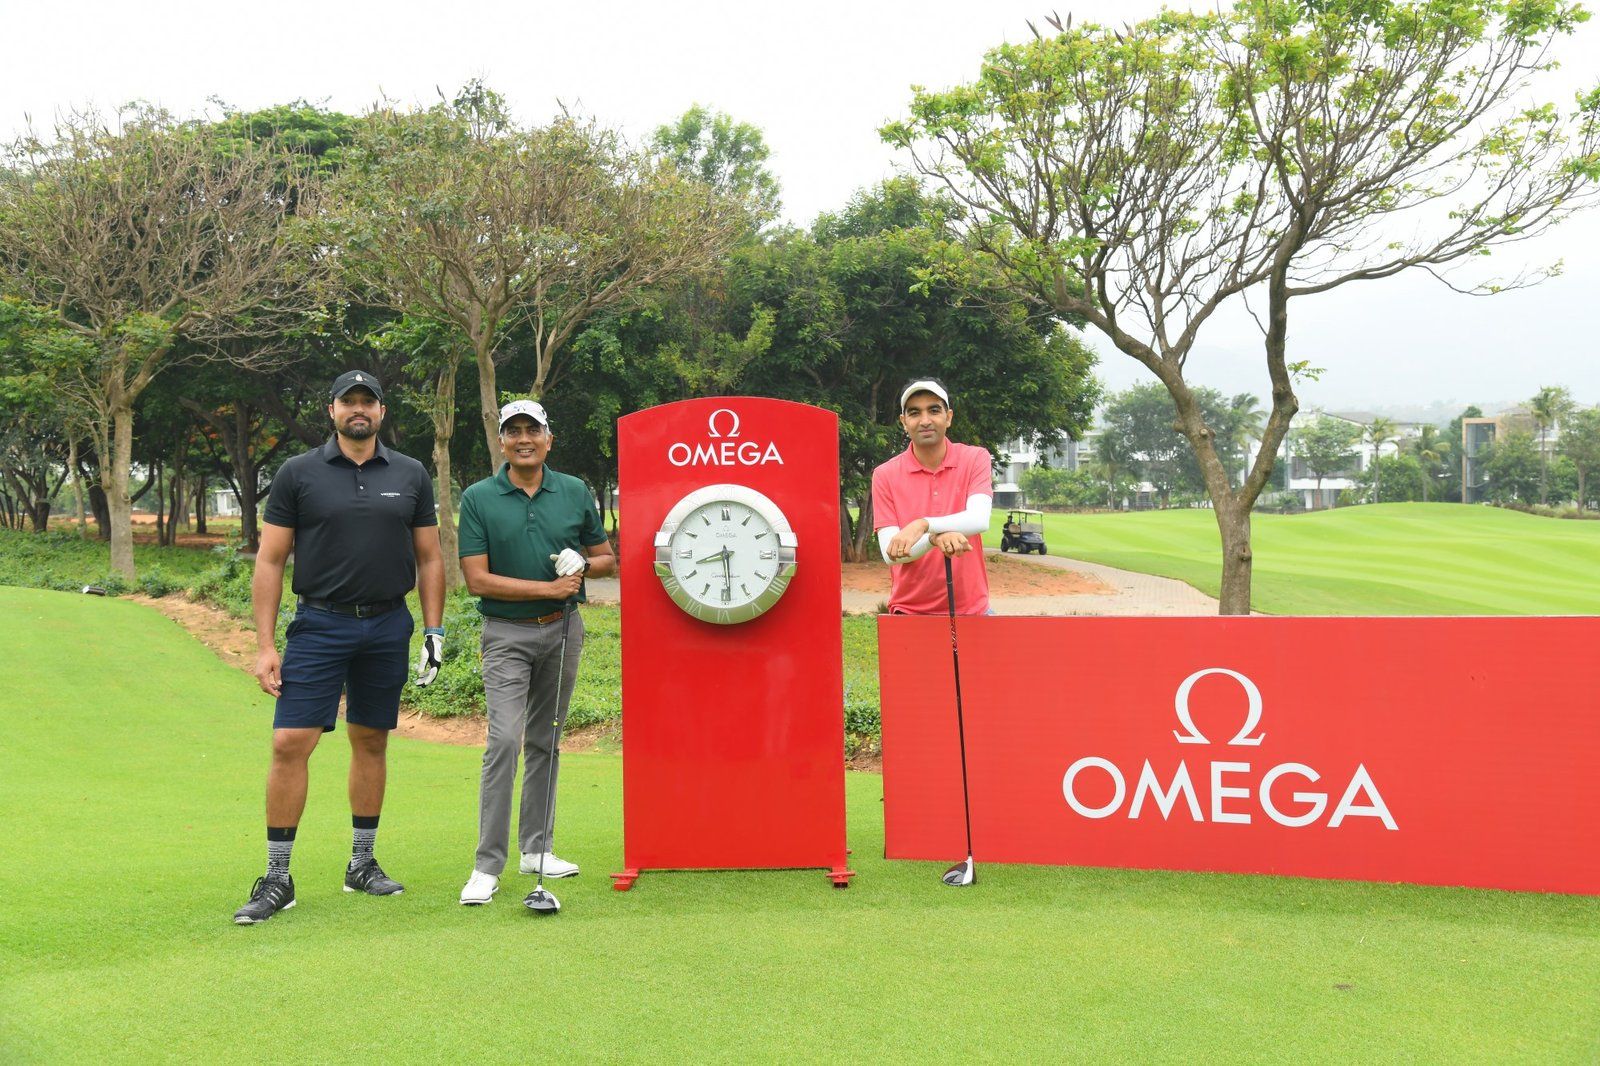 OMEGA’s Golf Event As Co-Sponsors With Mercedes Benz